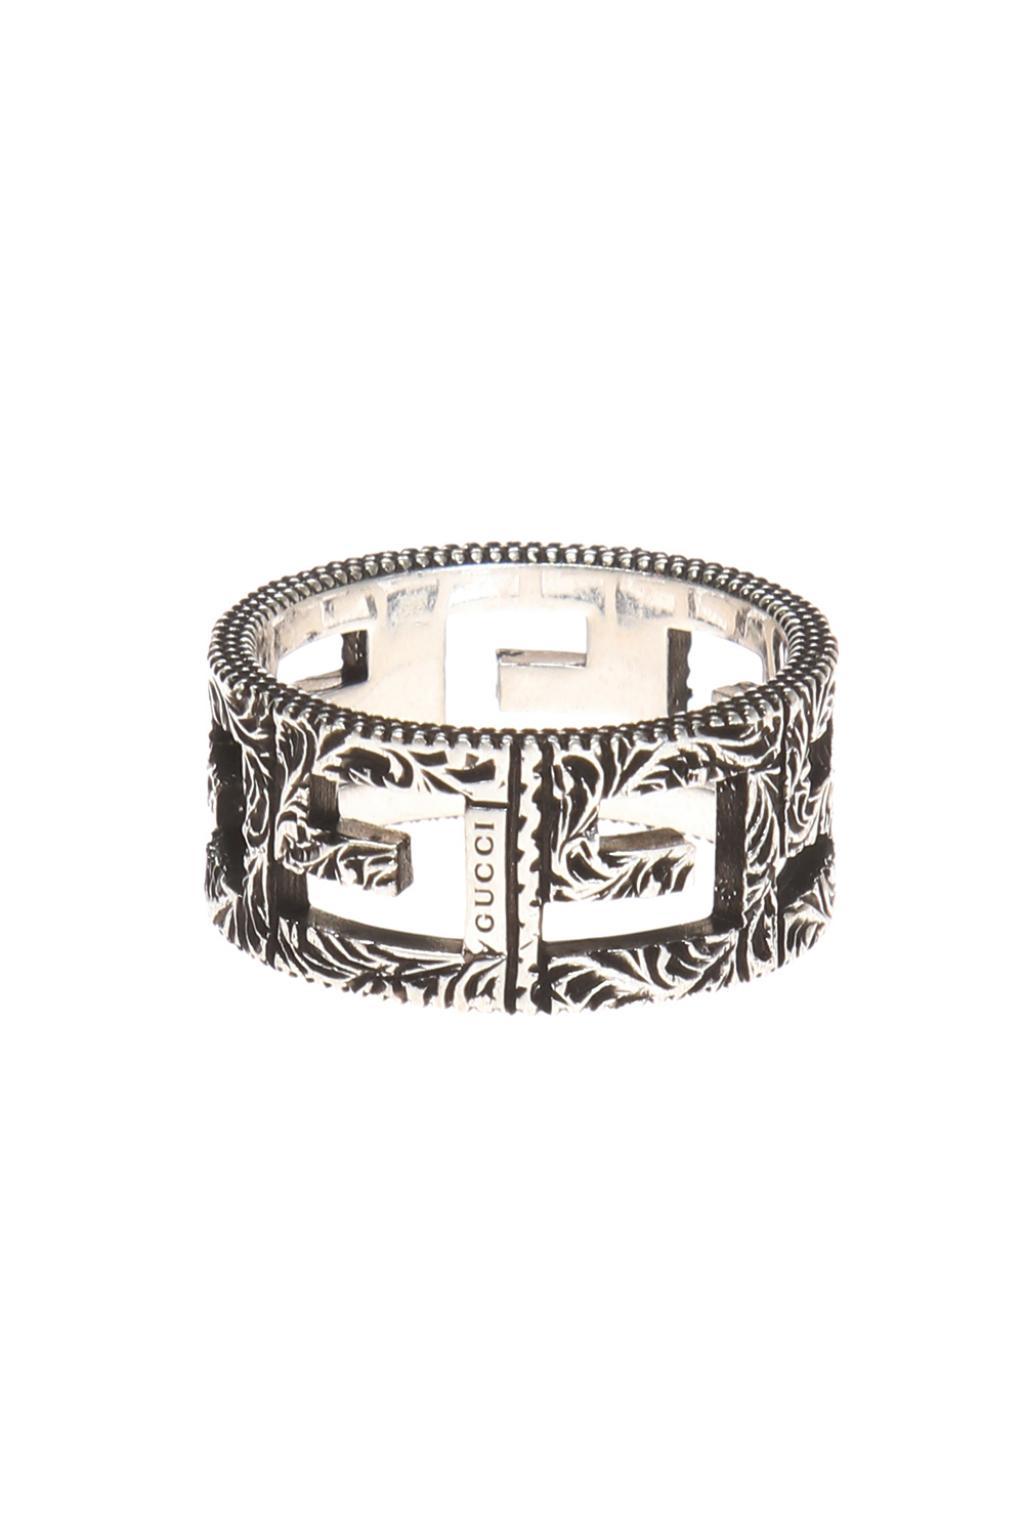 Gucci Silver Ring in Metallic for Men - Lyst